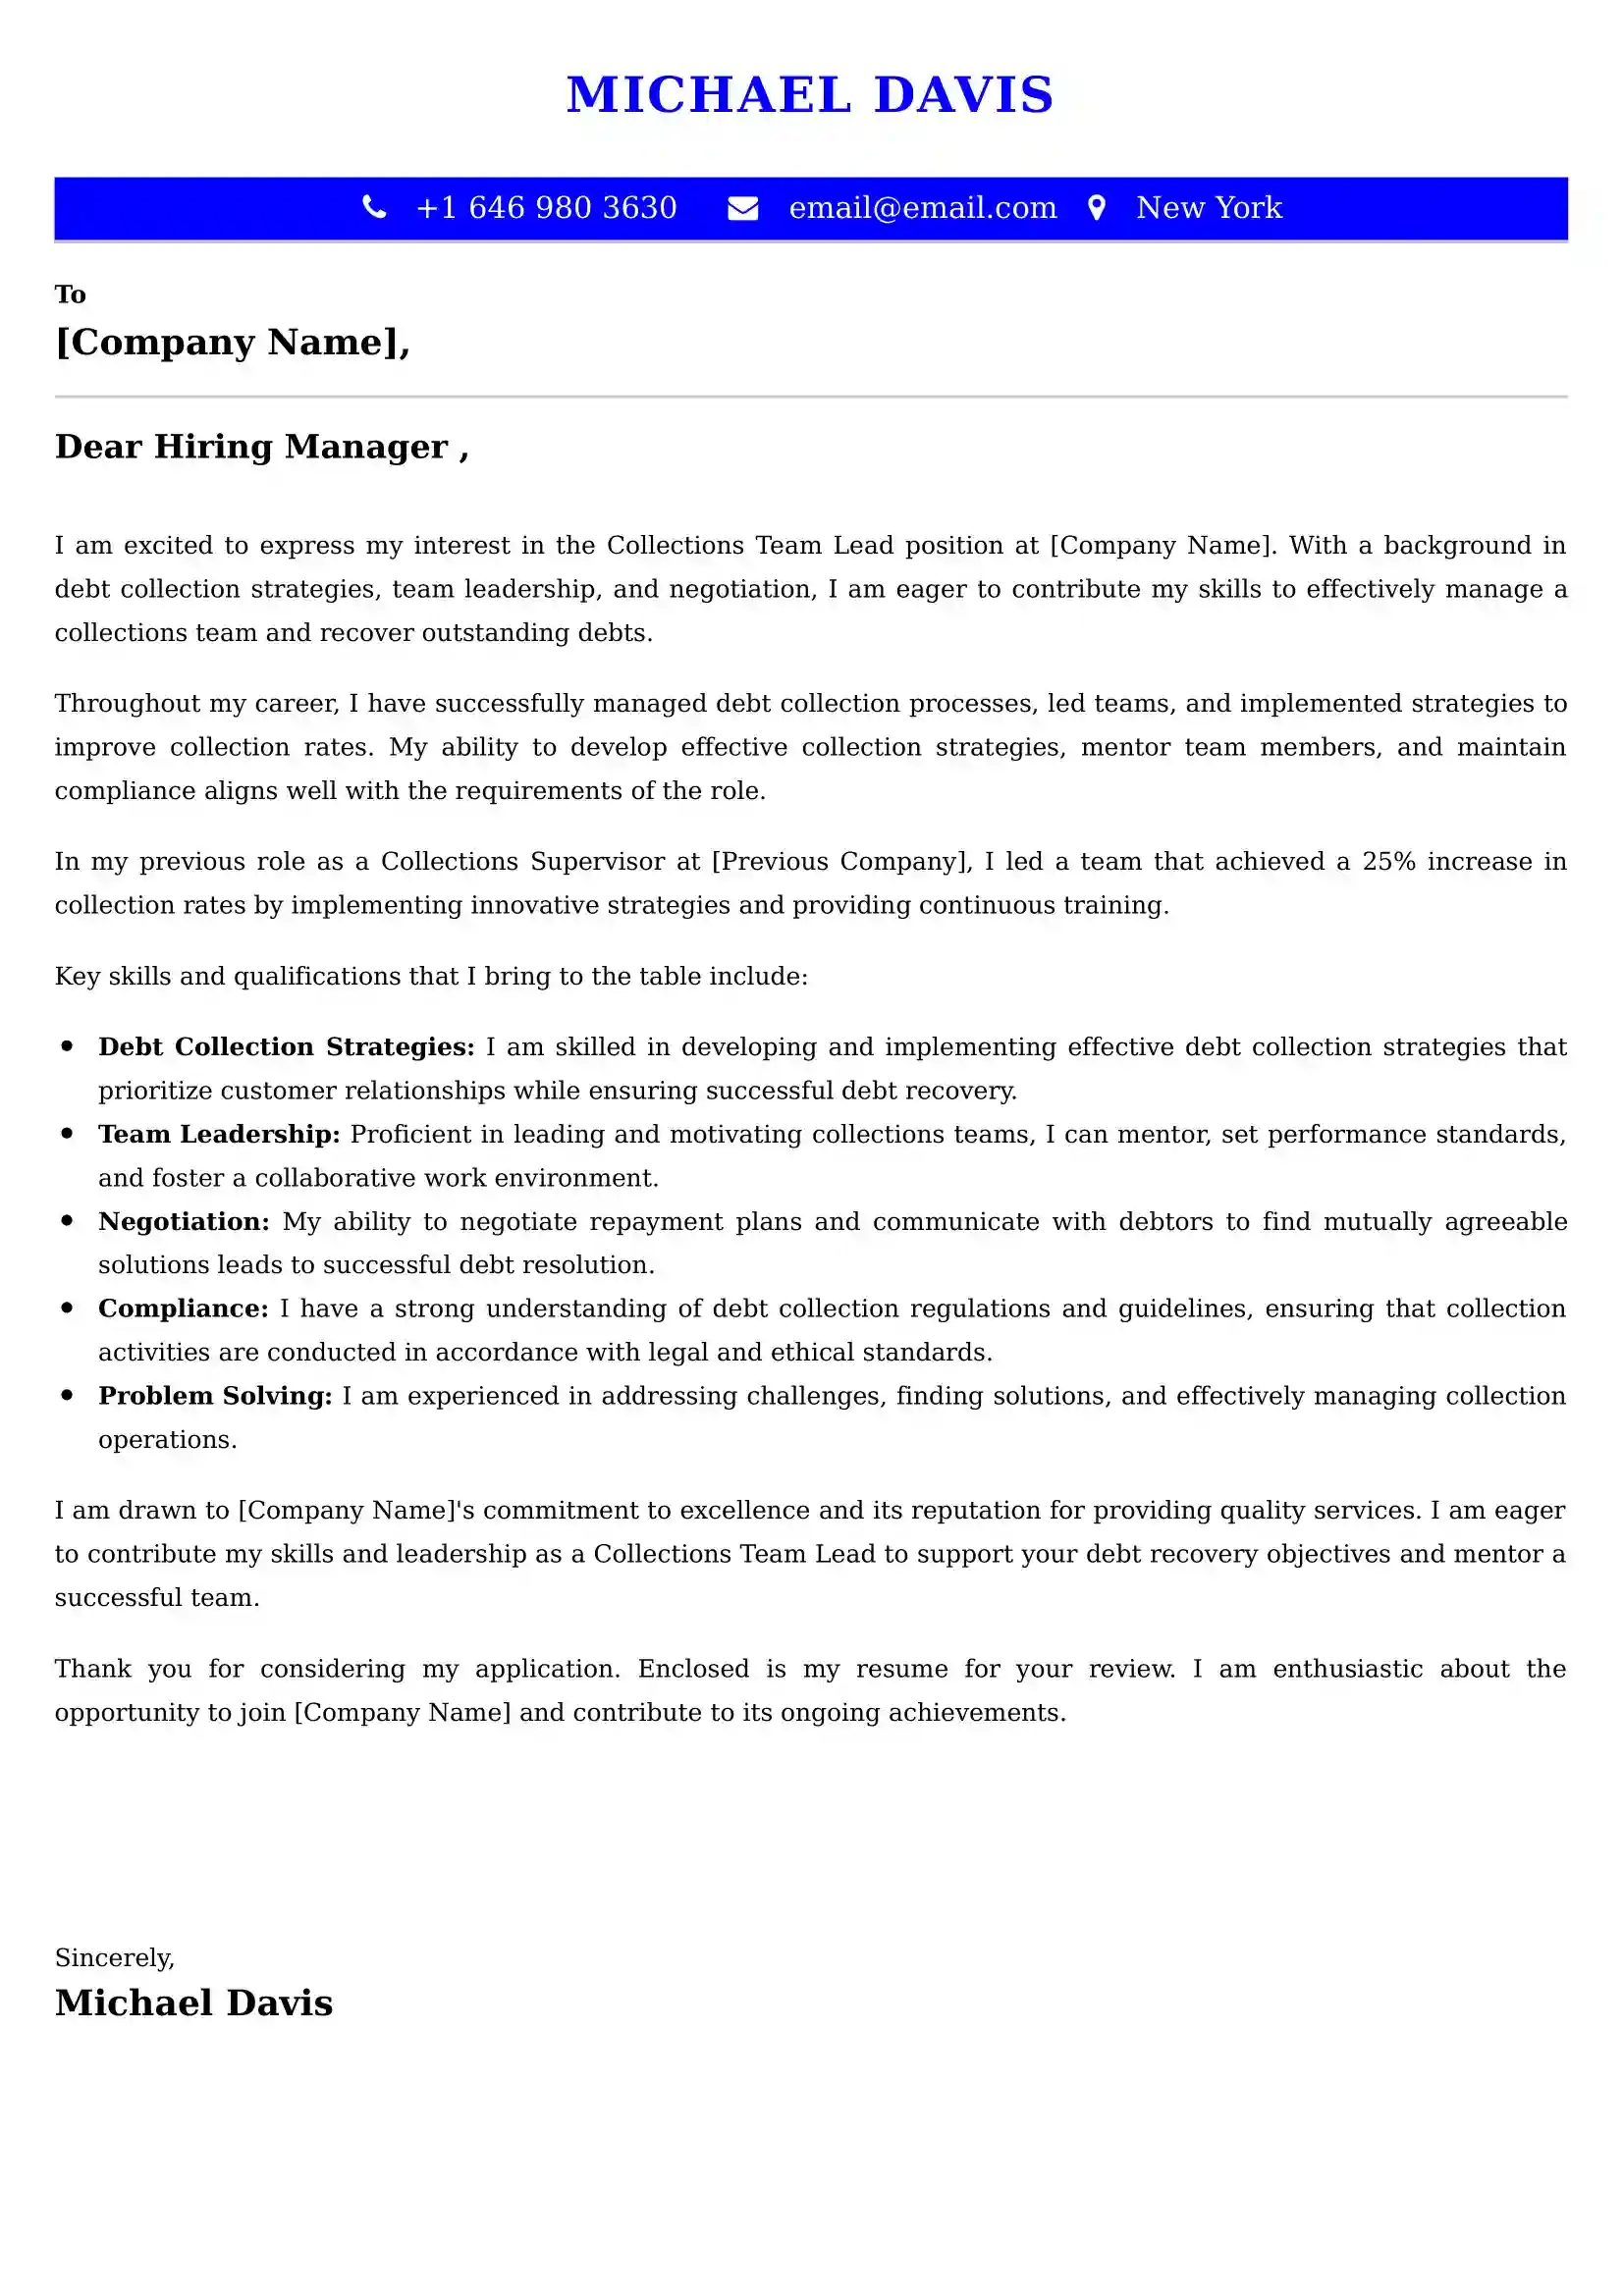 Collections Team Lead Cover Letter Examples Australia